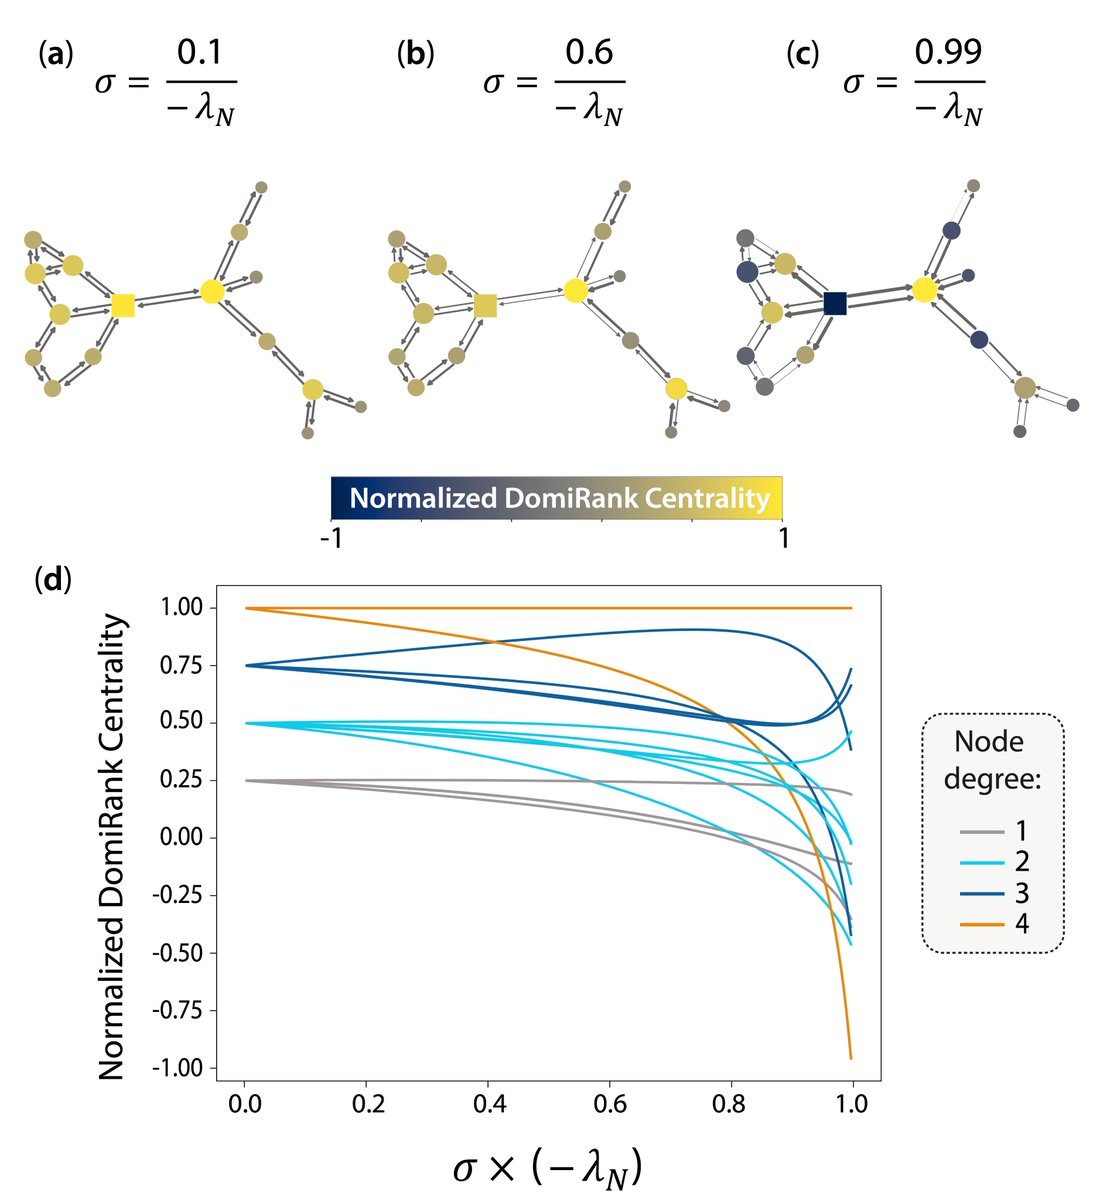 Just out in @NatureComms: nature.com/articles/s4146…. We introduce a centrality metric, DomiRank, based on a competition mechanism and show how investing in unimportant connections and conniving with others can be crucial for enhancing network robustness and functionality.